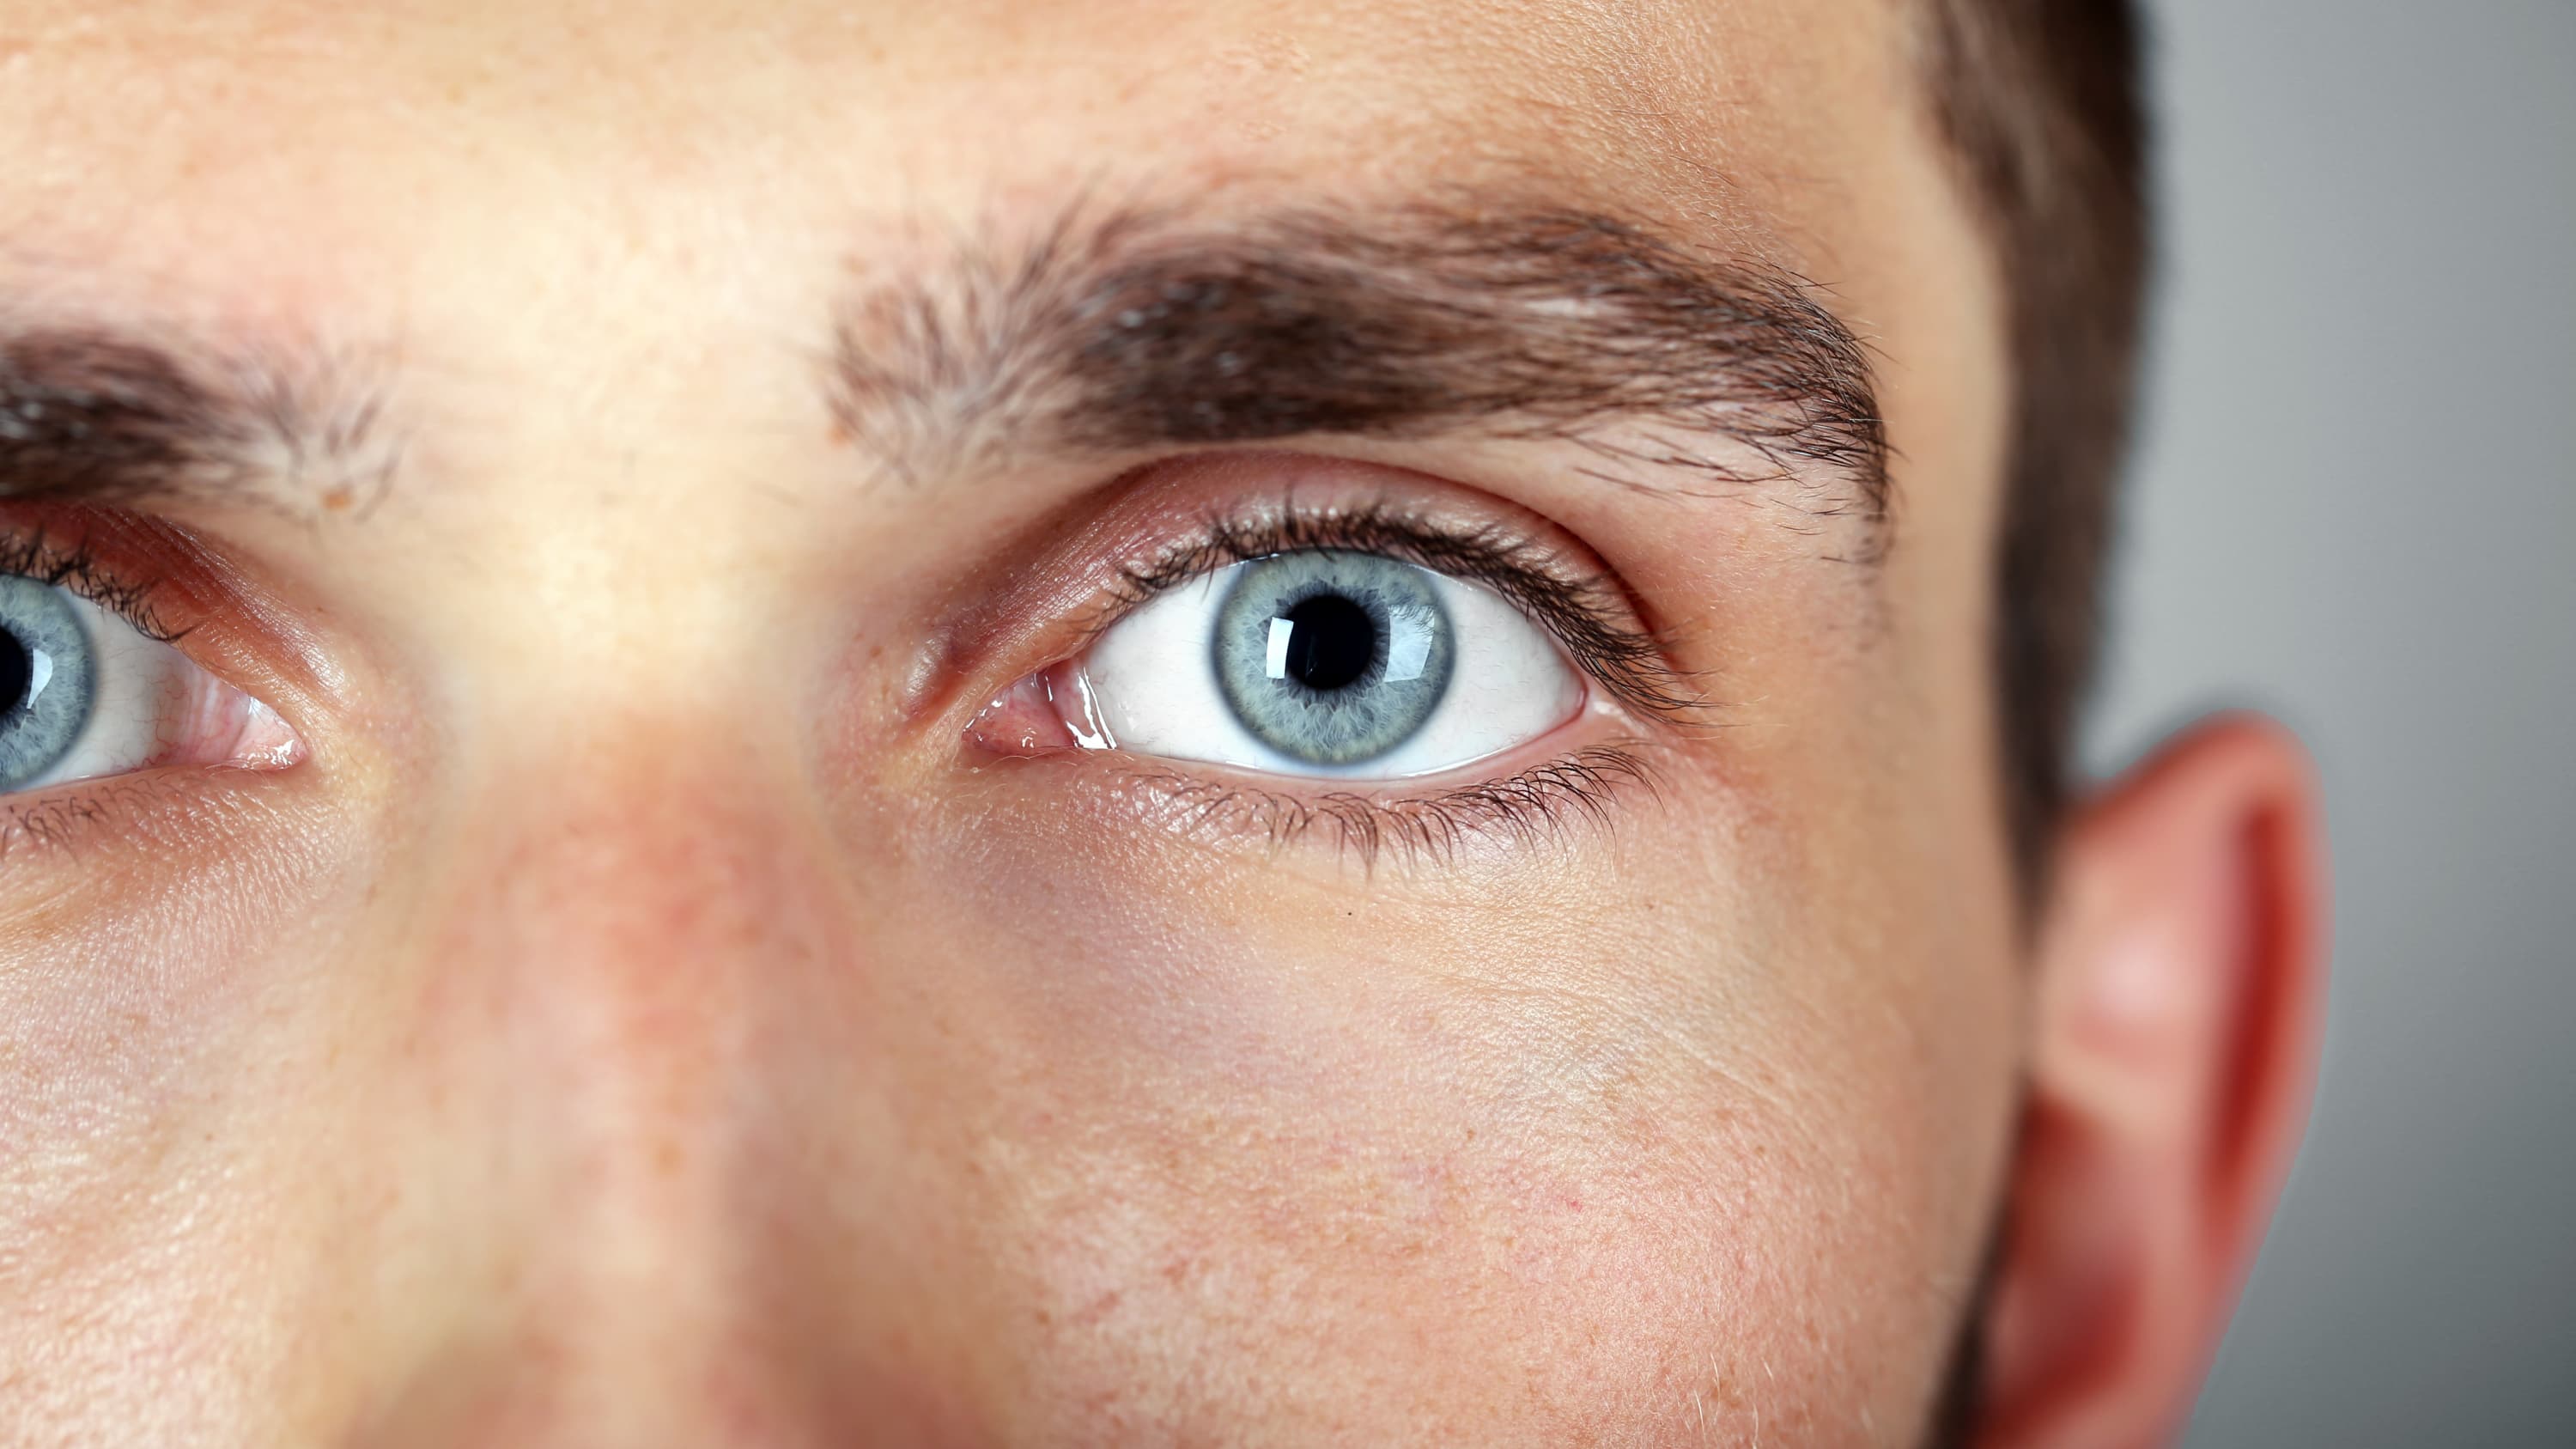 Close up of a man with blue eyes who possibly has a benign eyelid or eye growth